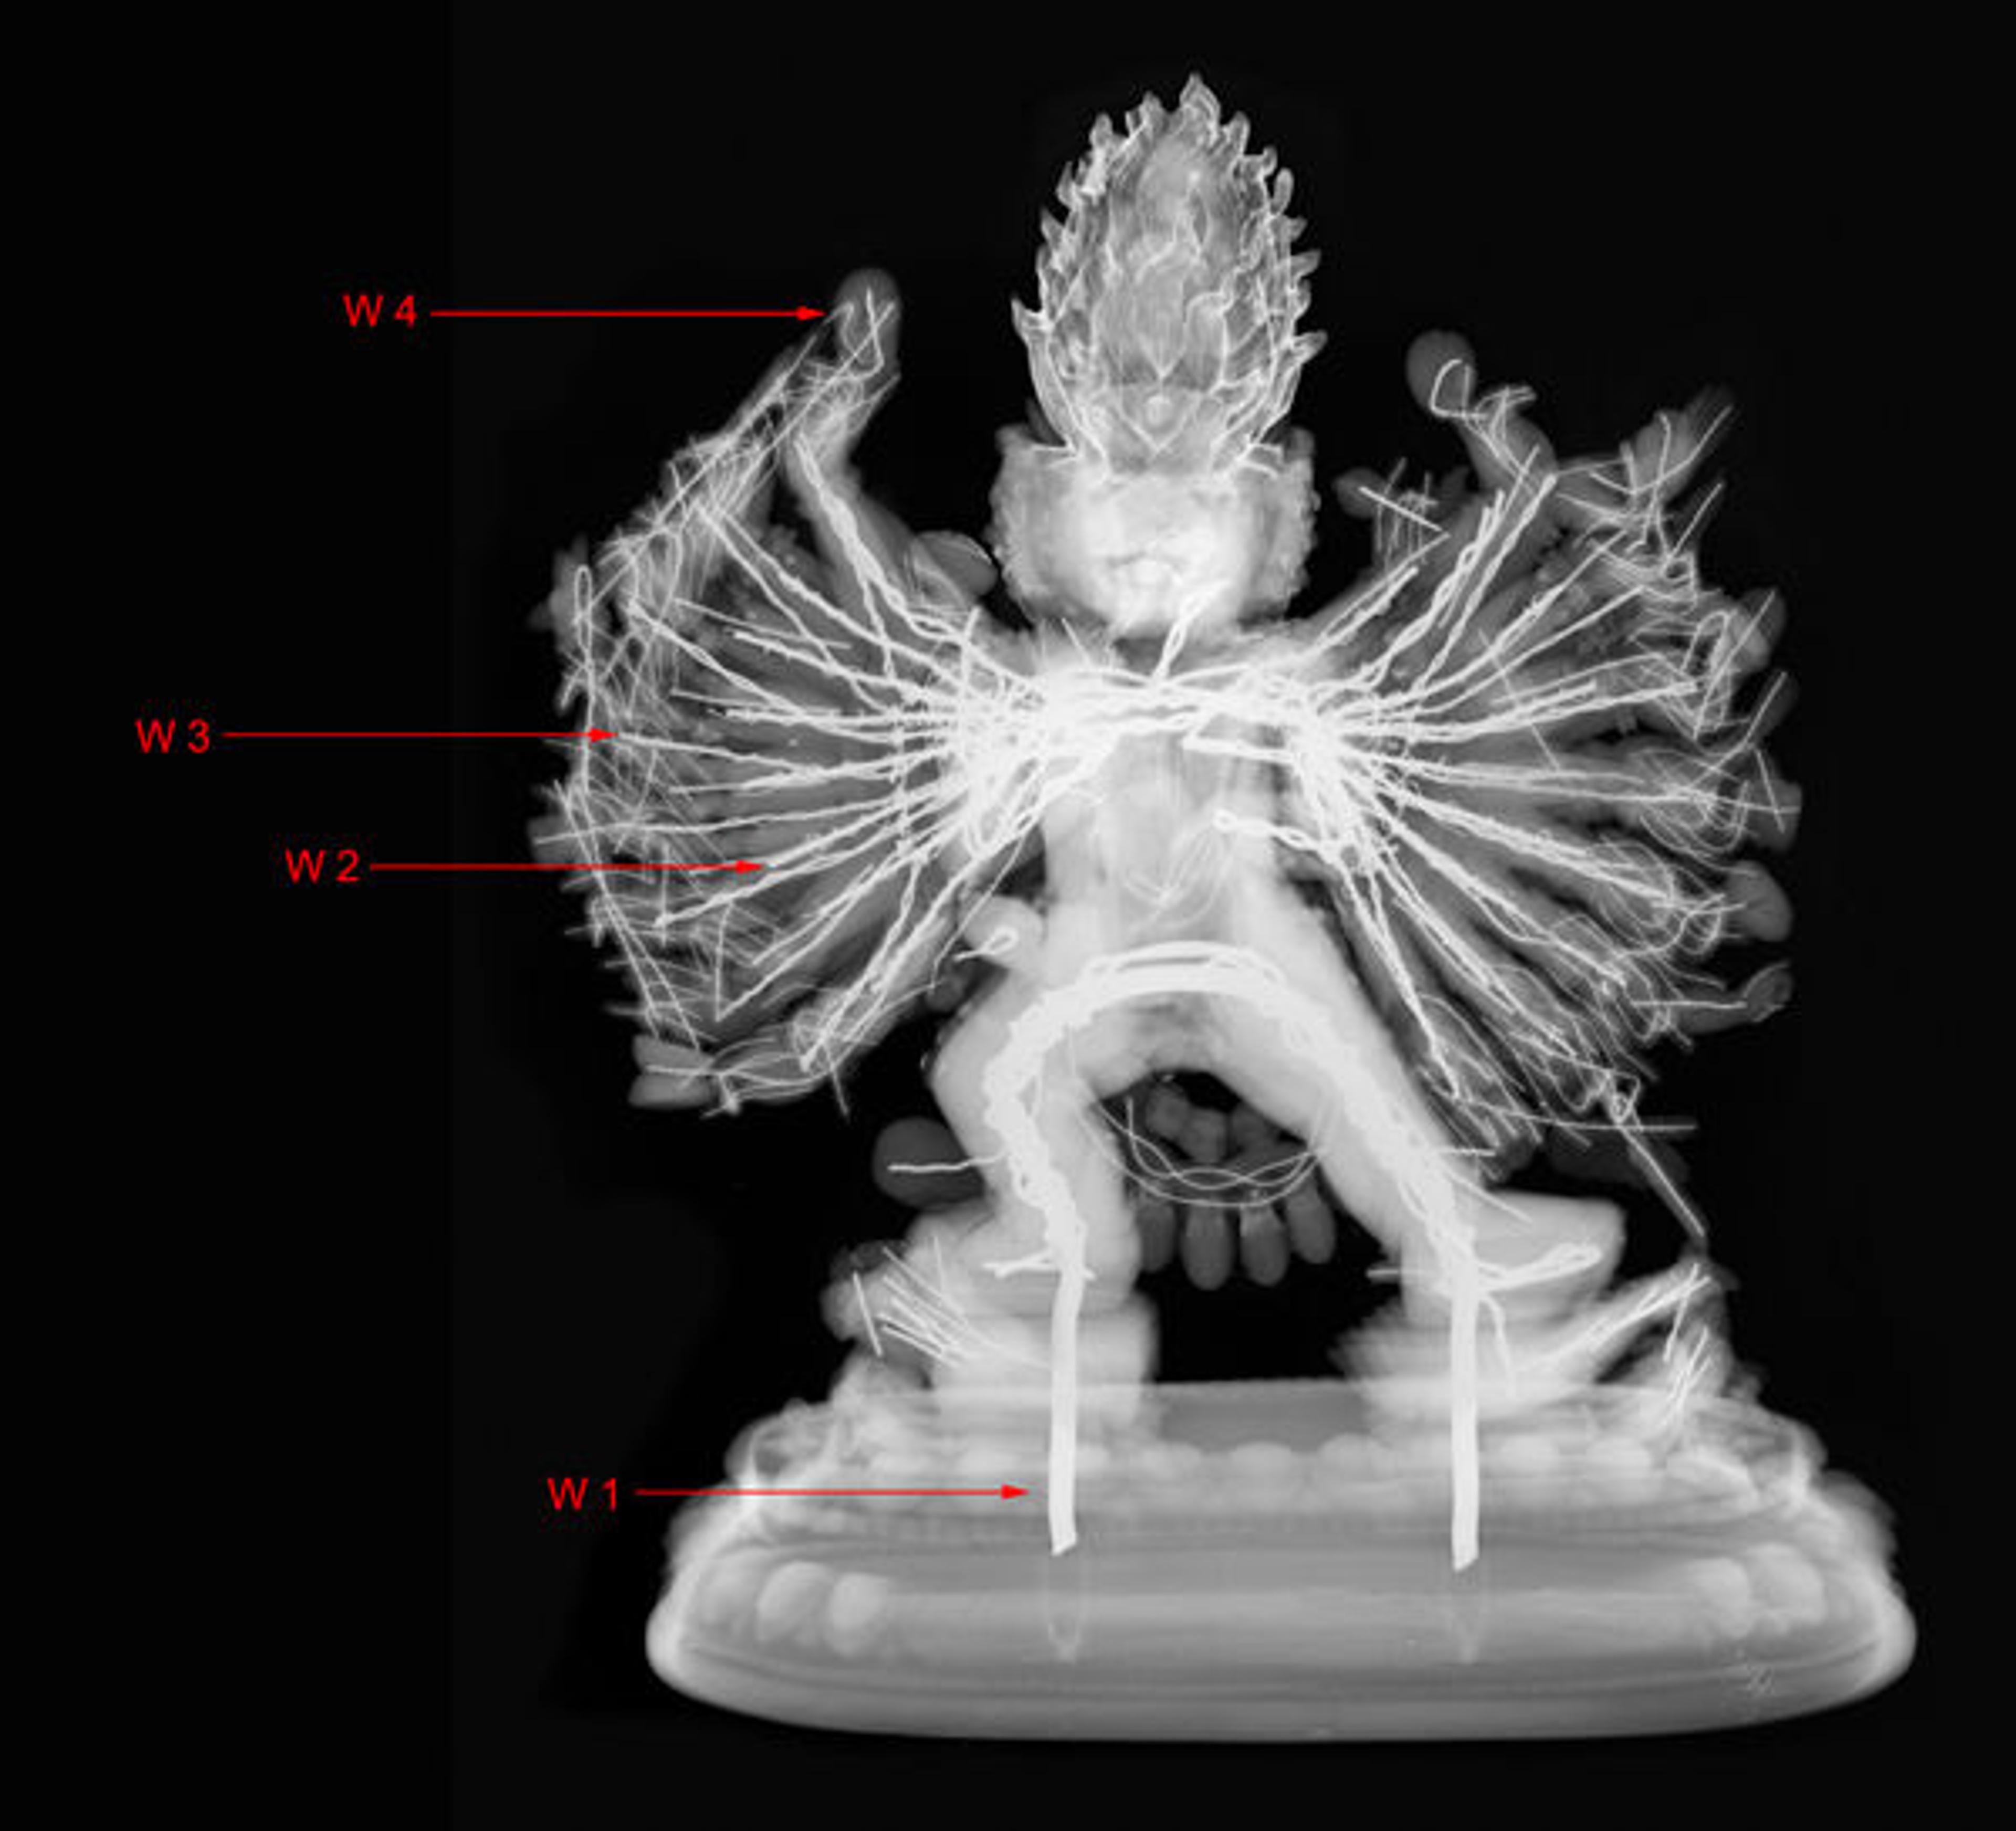 X-ray radiograph of Vajrabhairava (48.30.14). The arrows indicate the four different wire thicknesses.